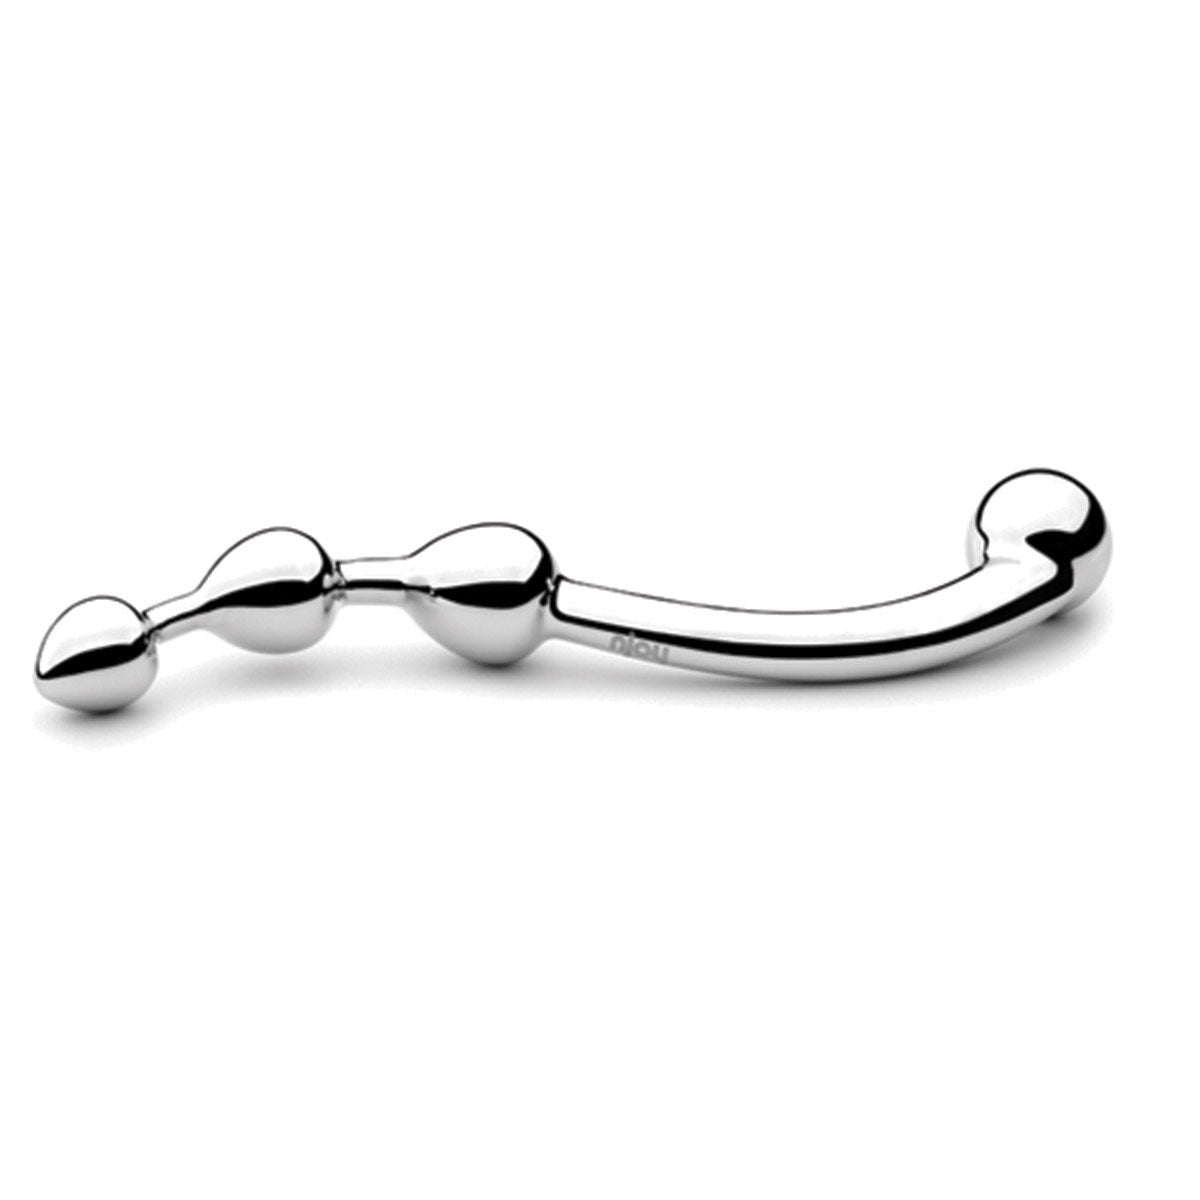 njoy Fun Stainless Steel Wand Dildos with Beads